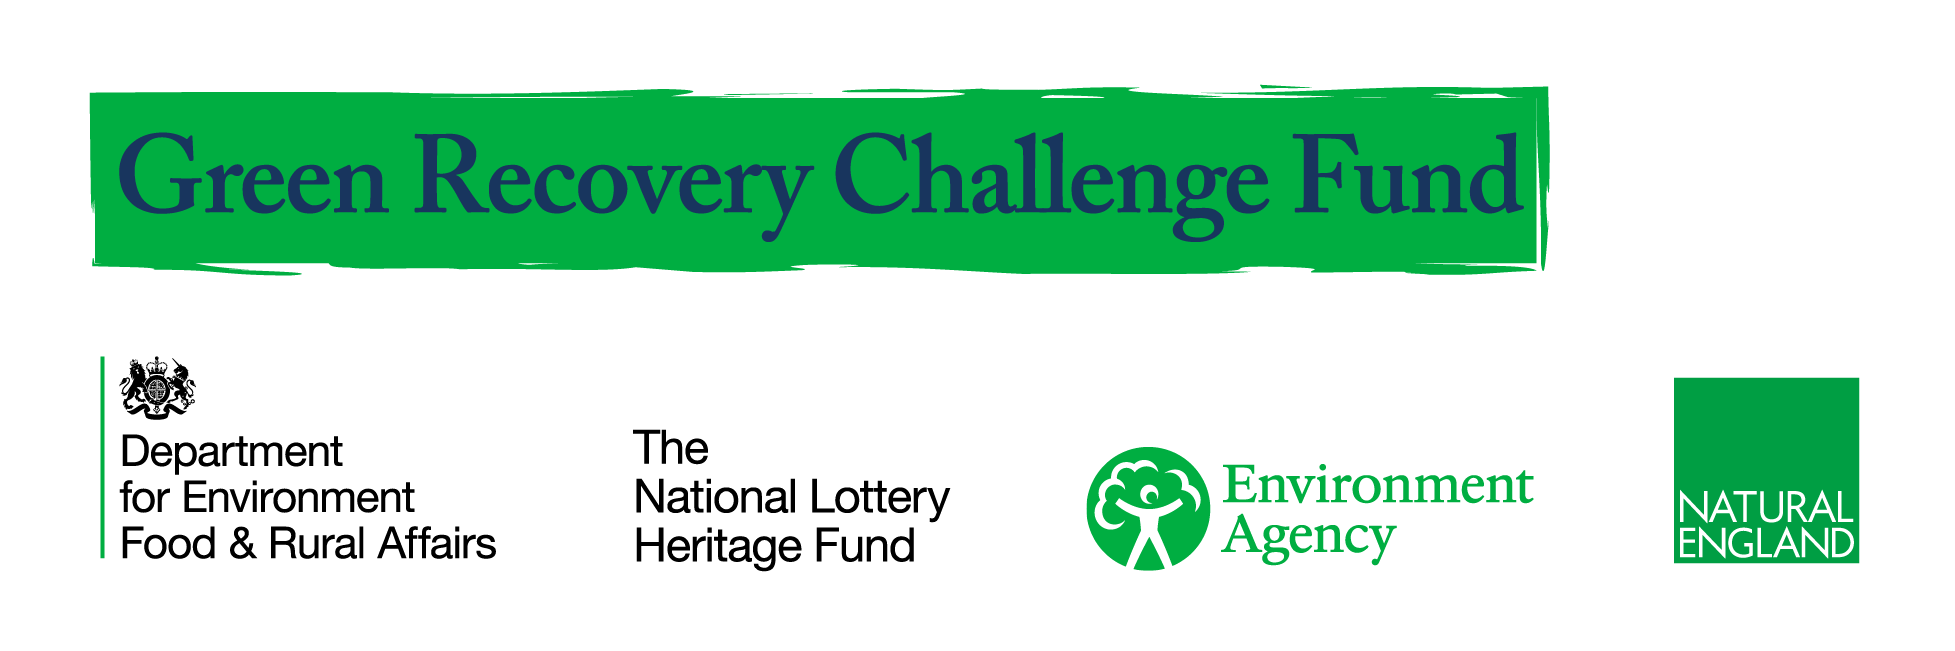 Green Recovery Challenge Find logo